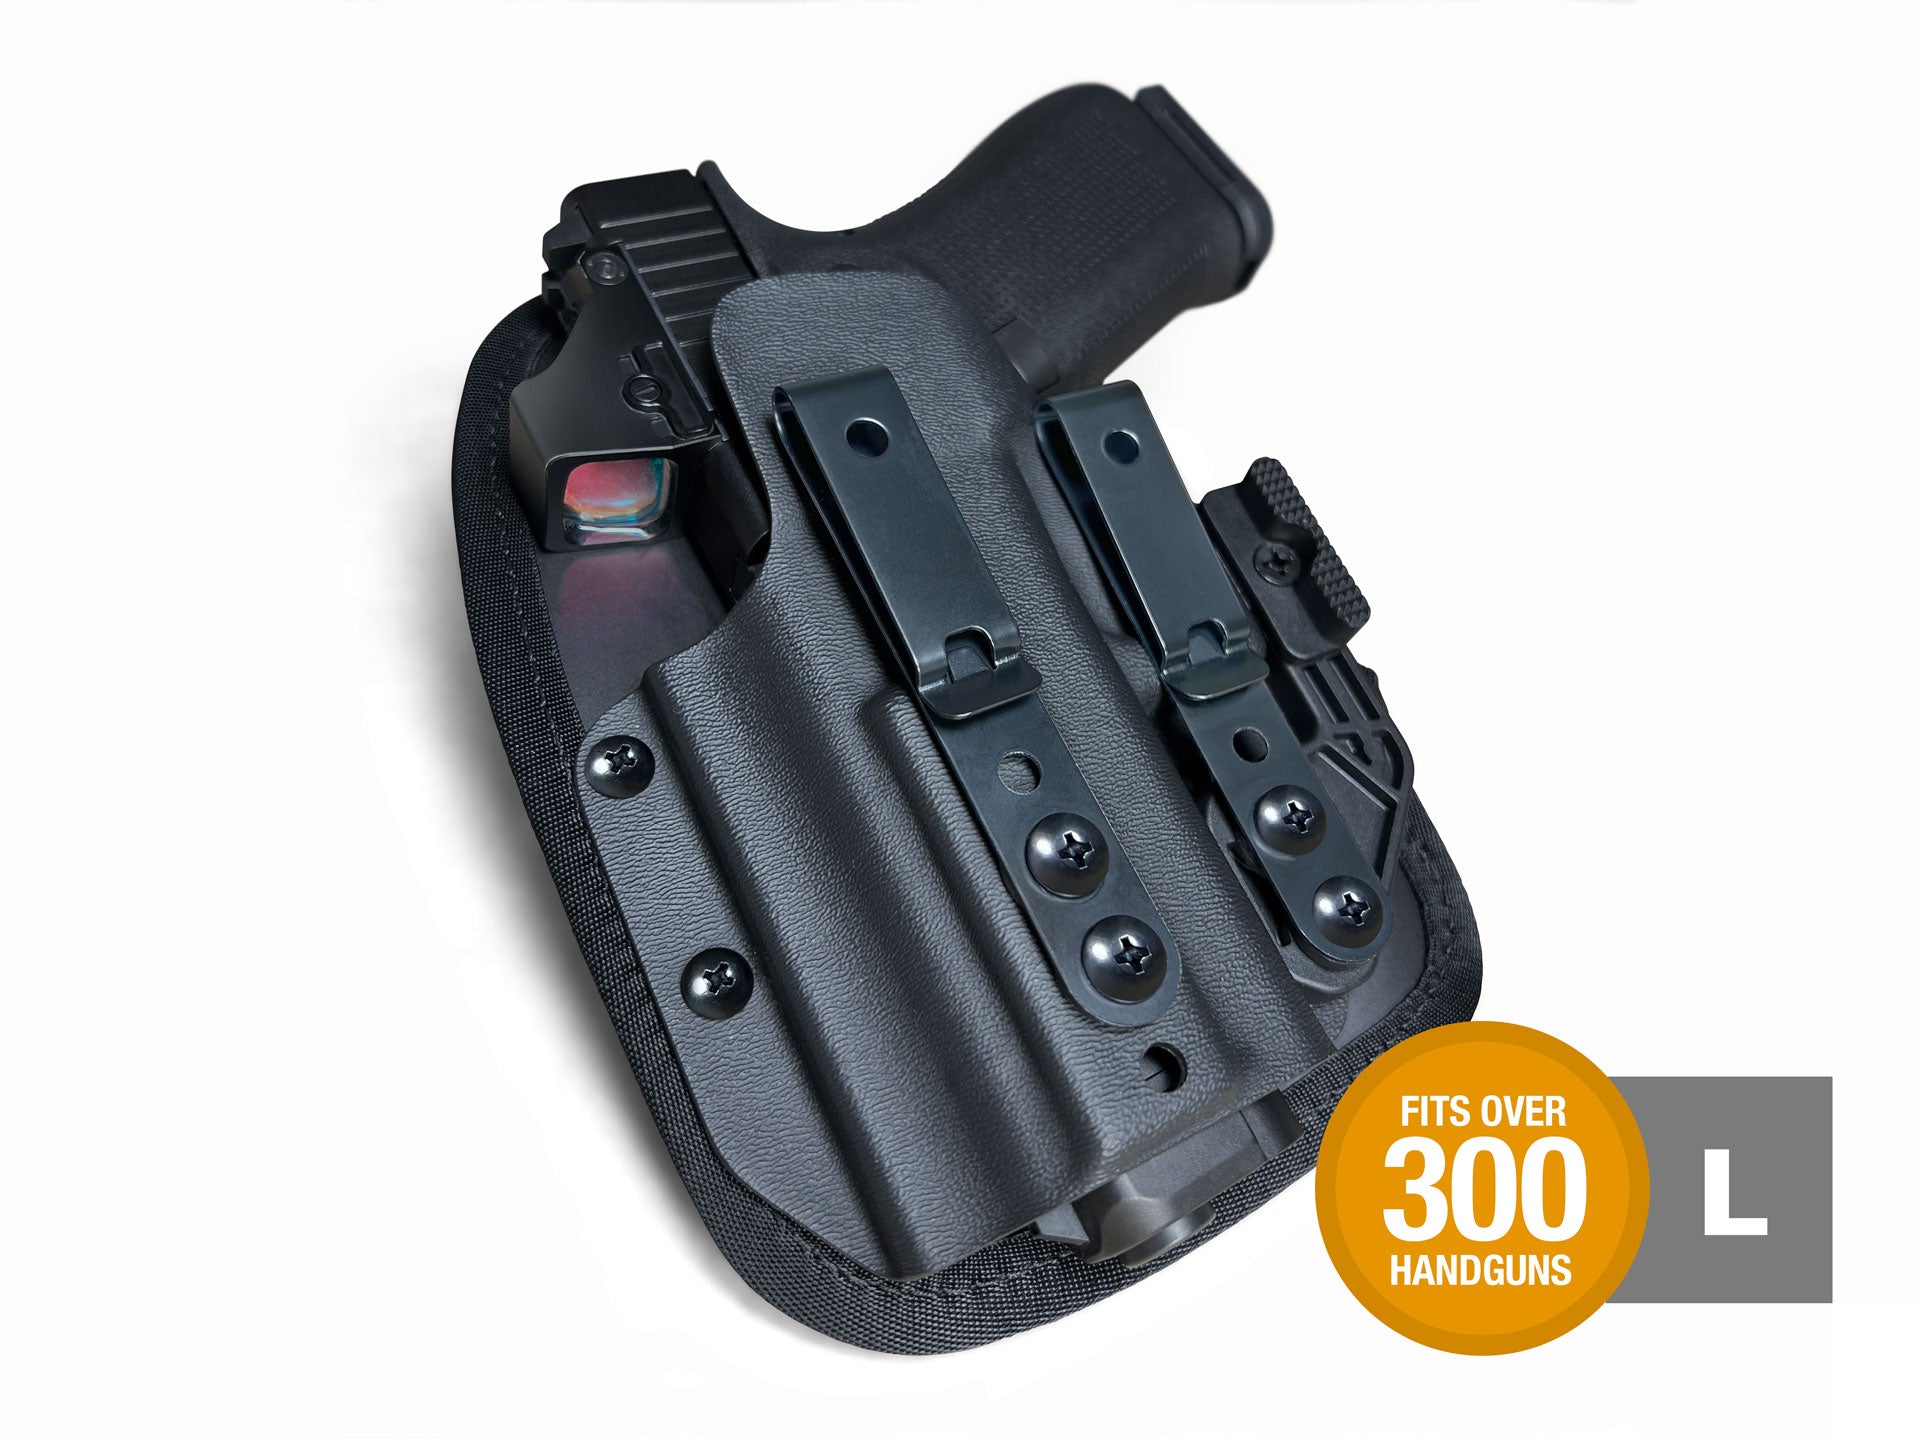 ACEXIER Tactical Gun Holster Concealed Carry Holster IWB OWB